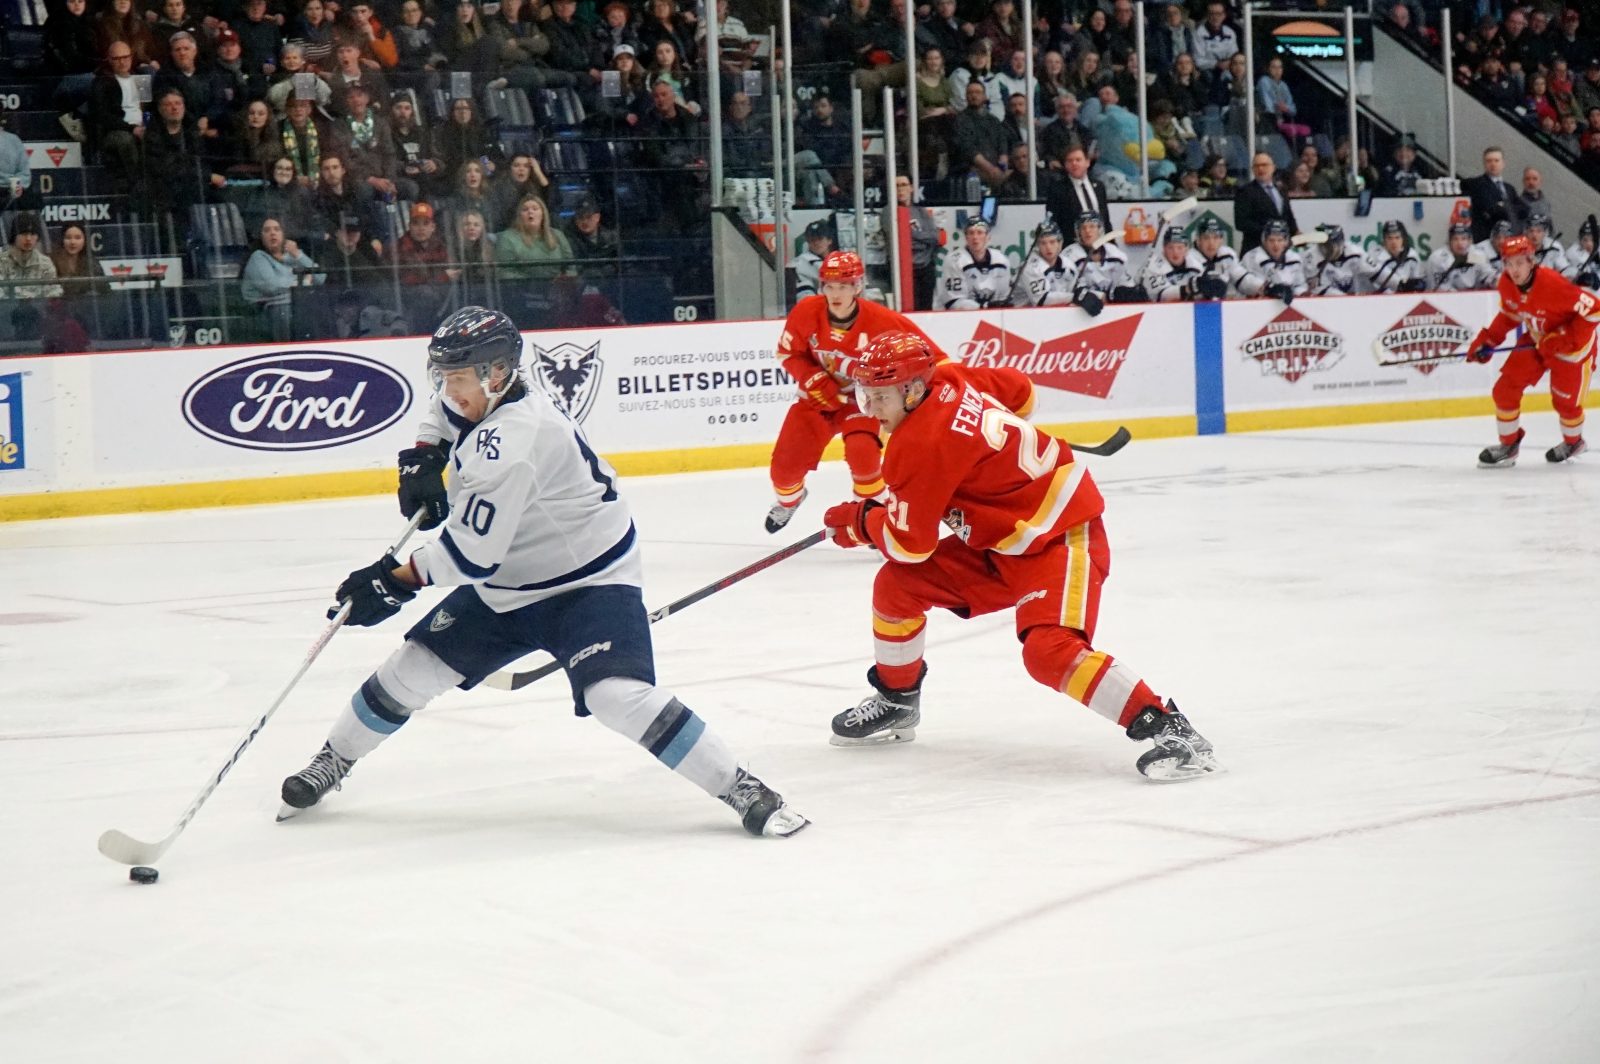 Phoenix burn bright as offense explodes for 16 goals during latest roadtrip